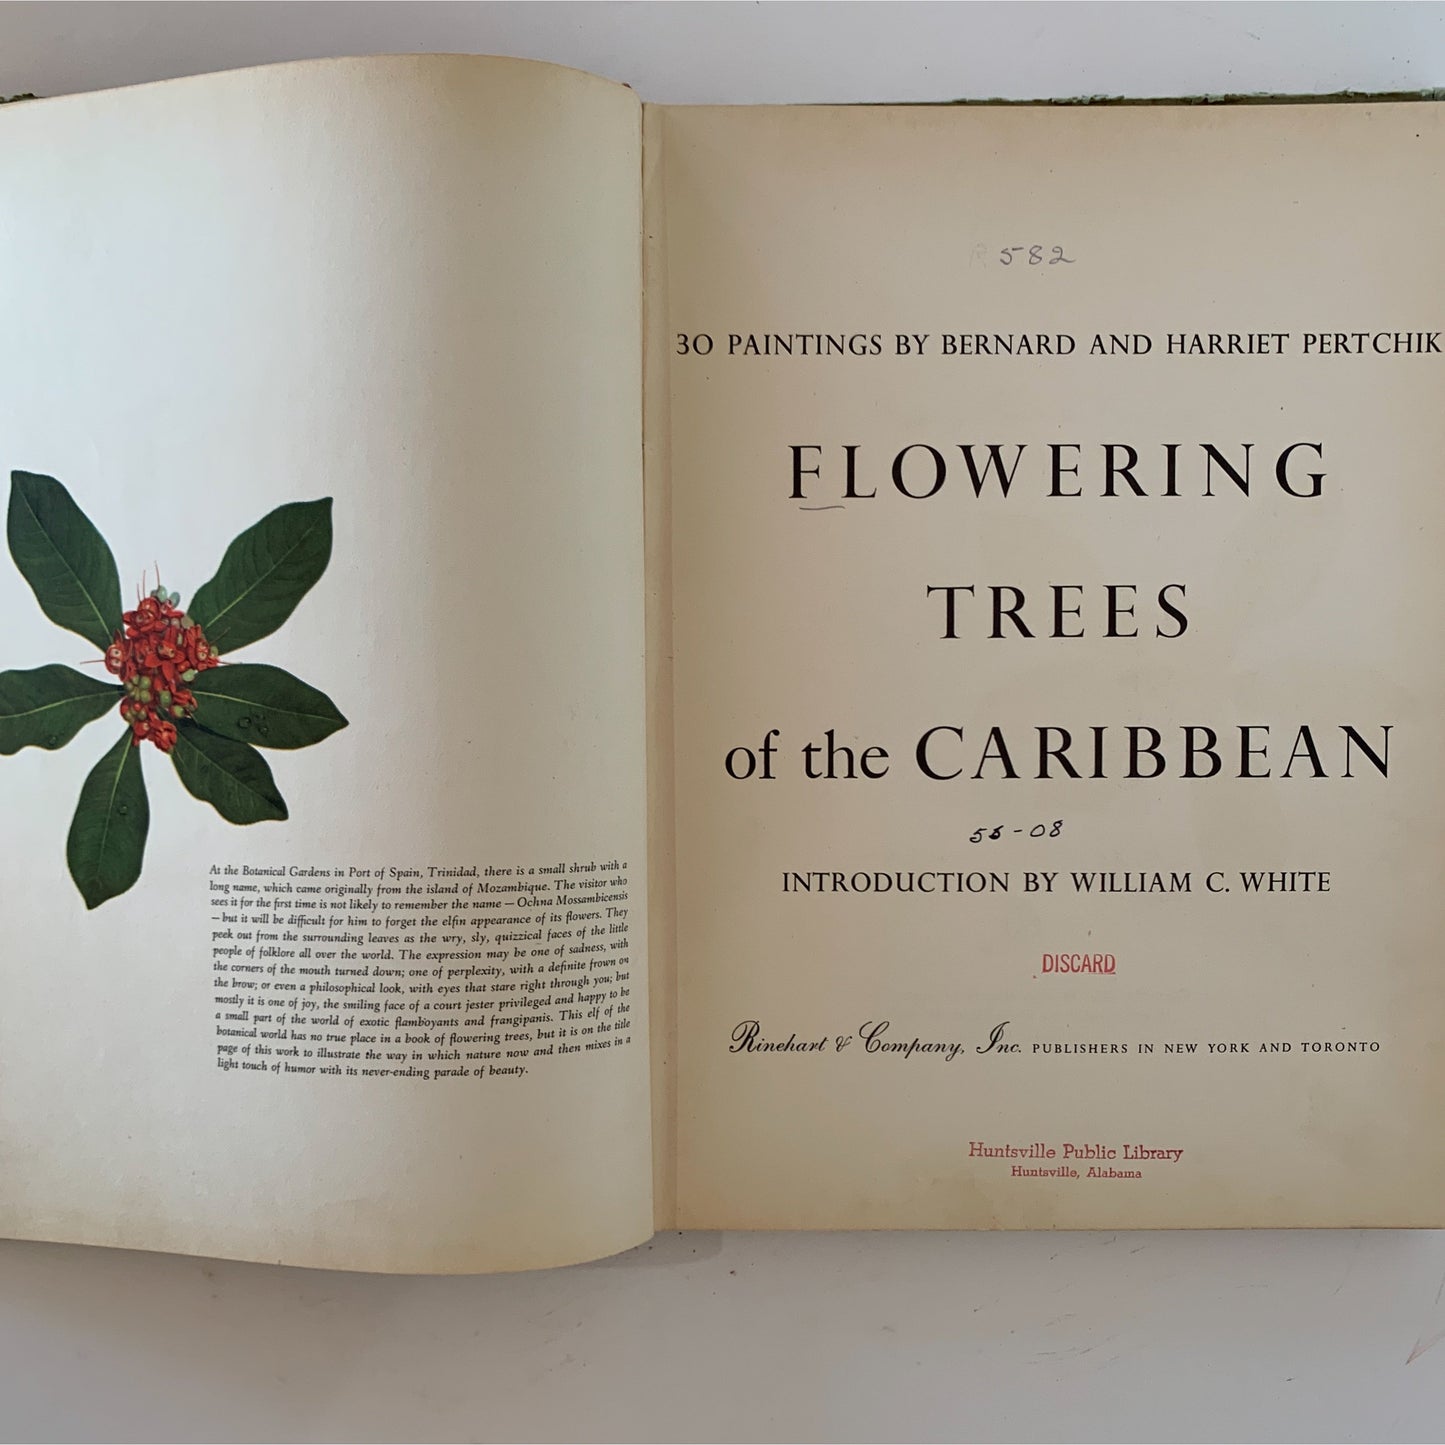 Flowering Trees of the Caribbean, 1951 Illustrated Botanical Book